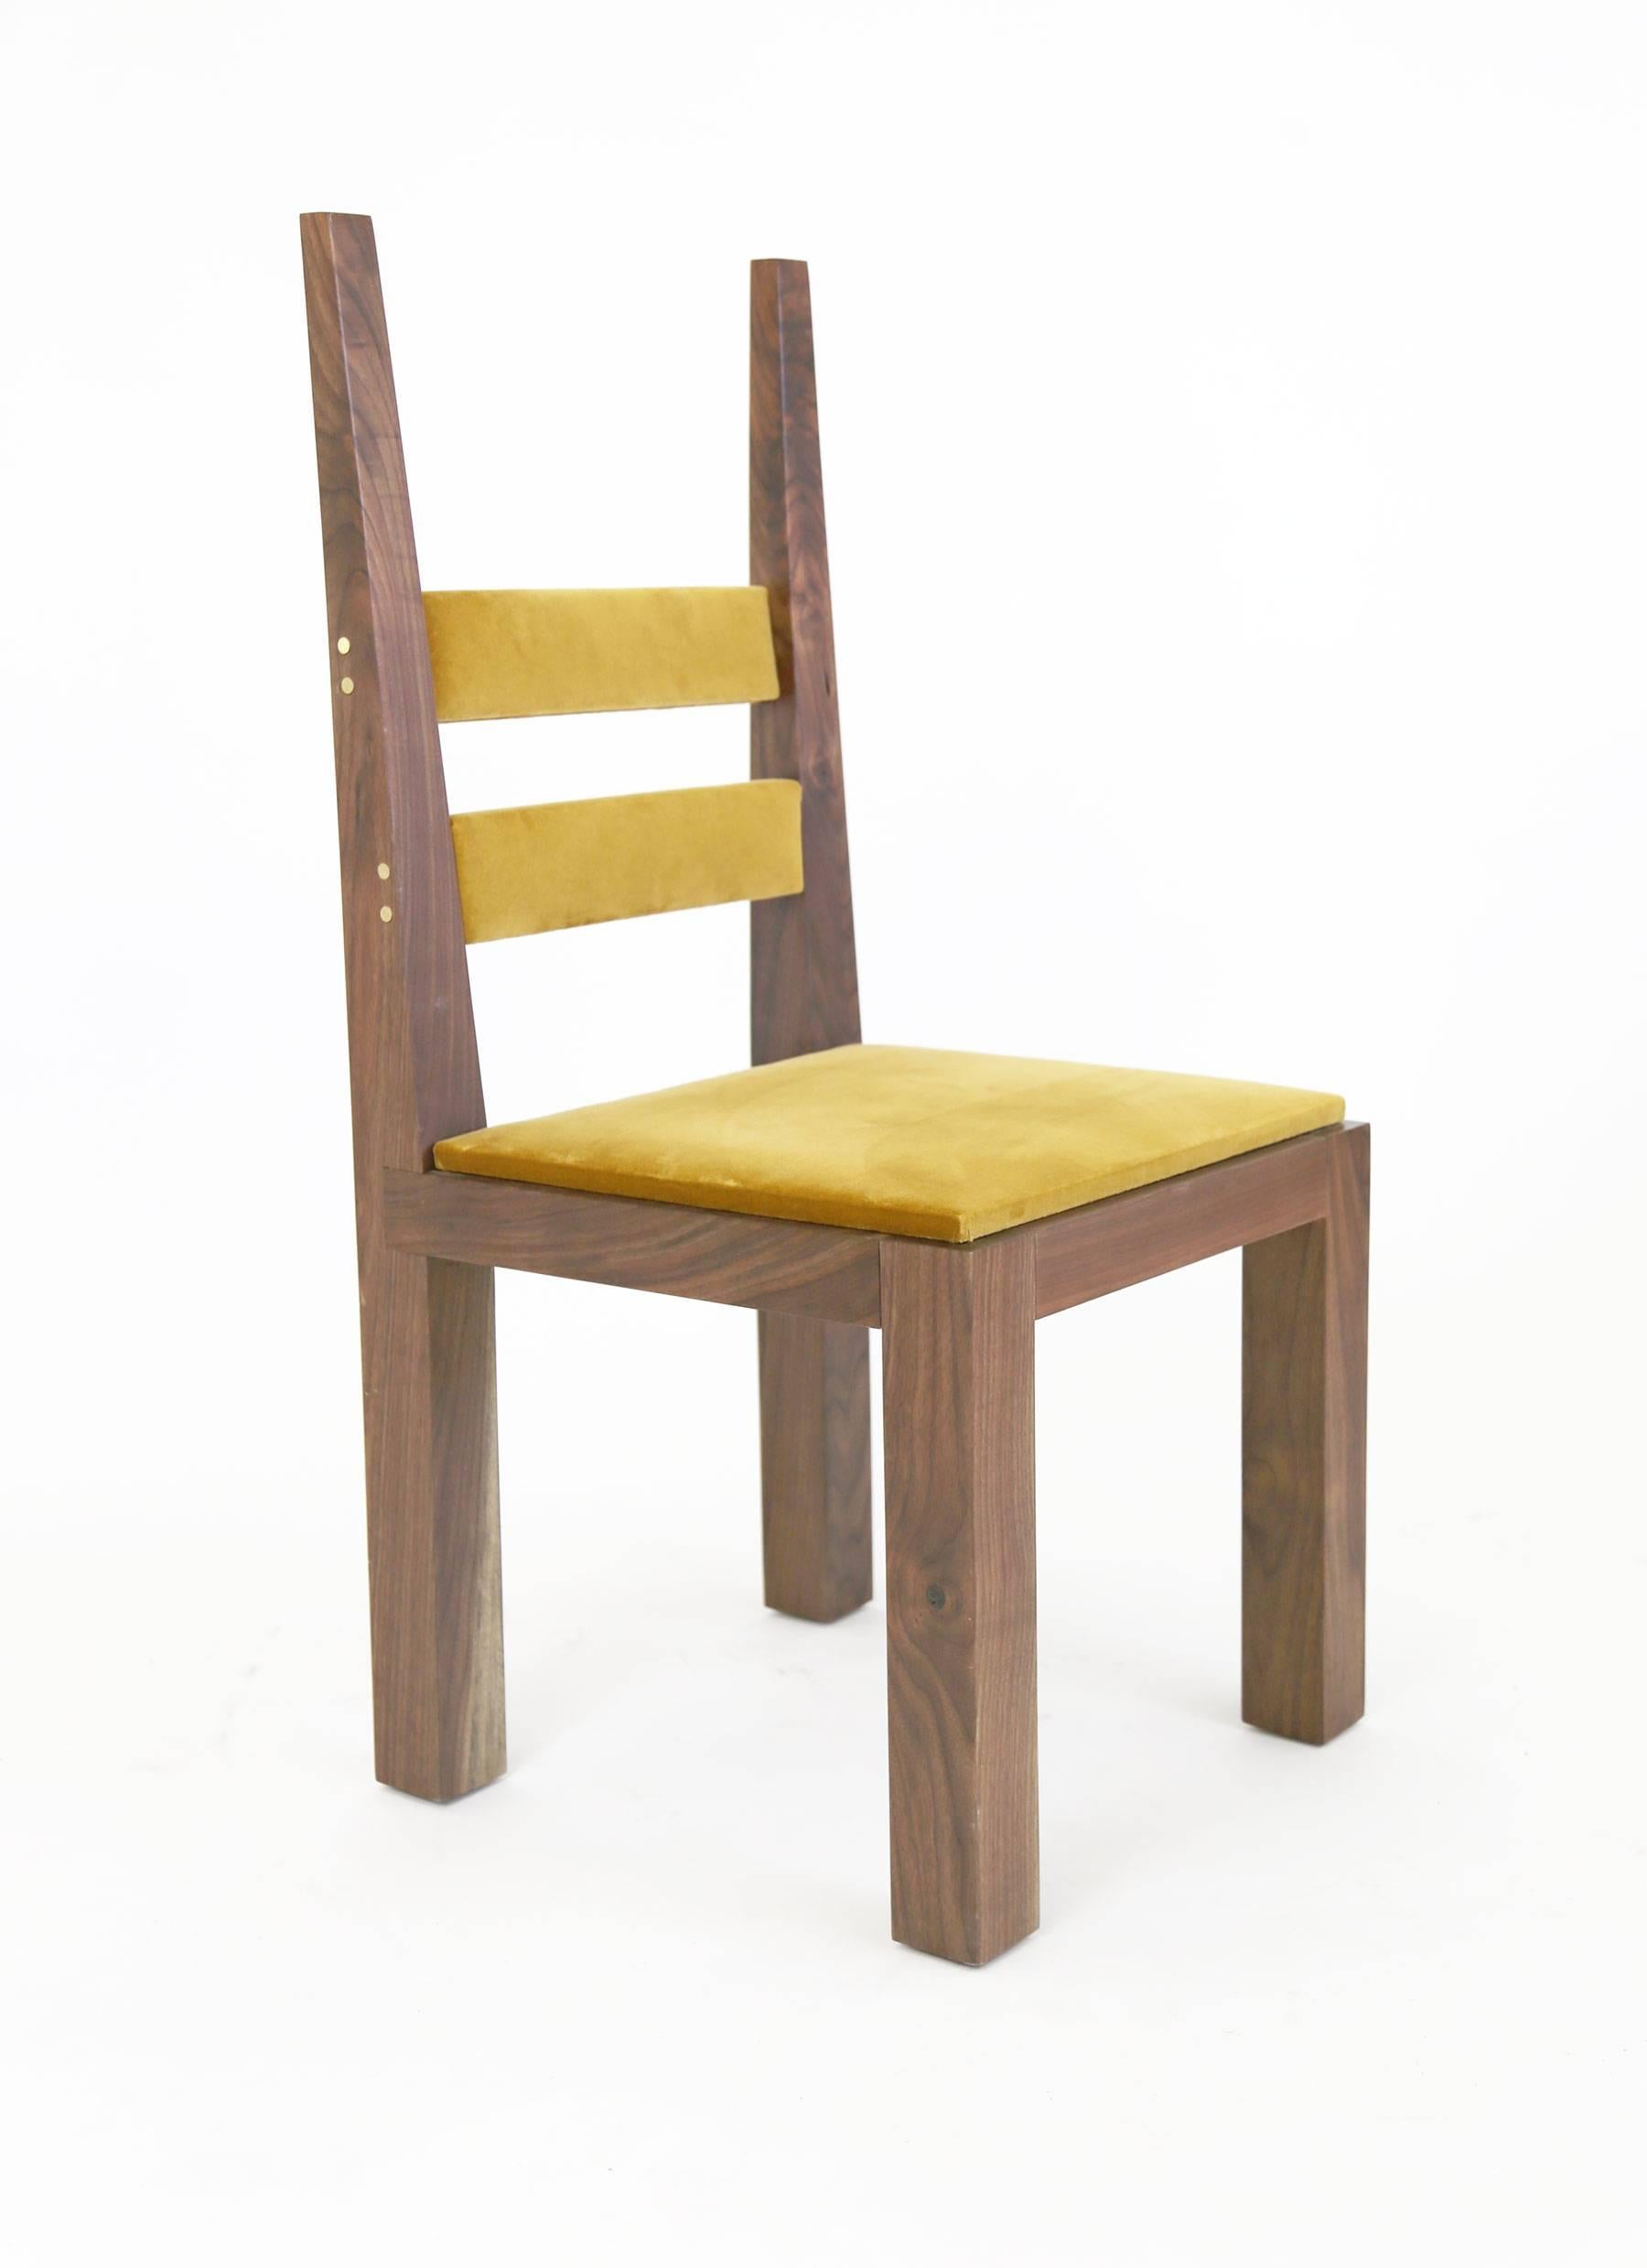 A contemporary dining chair designed and built by Sentient. It has both medieval and modern ideas including heavy legs and seat frame combined with the tapered, angled lines of the tall rear verticals.